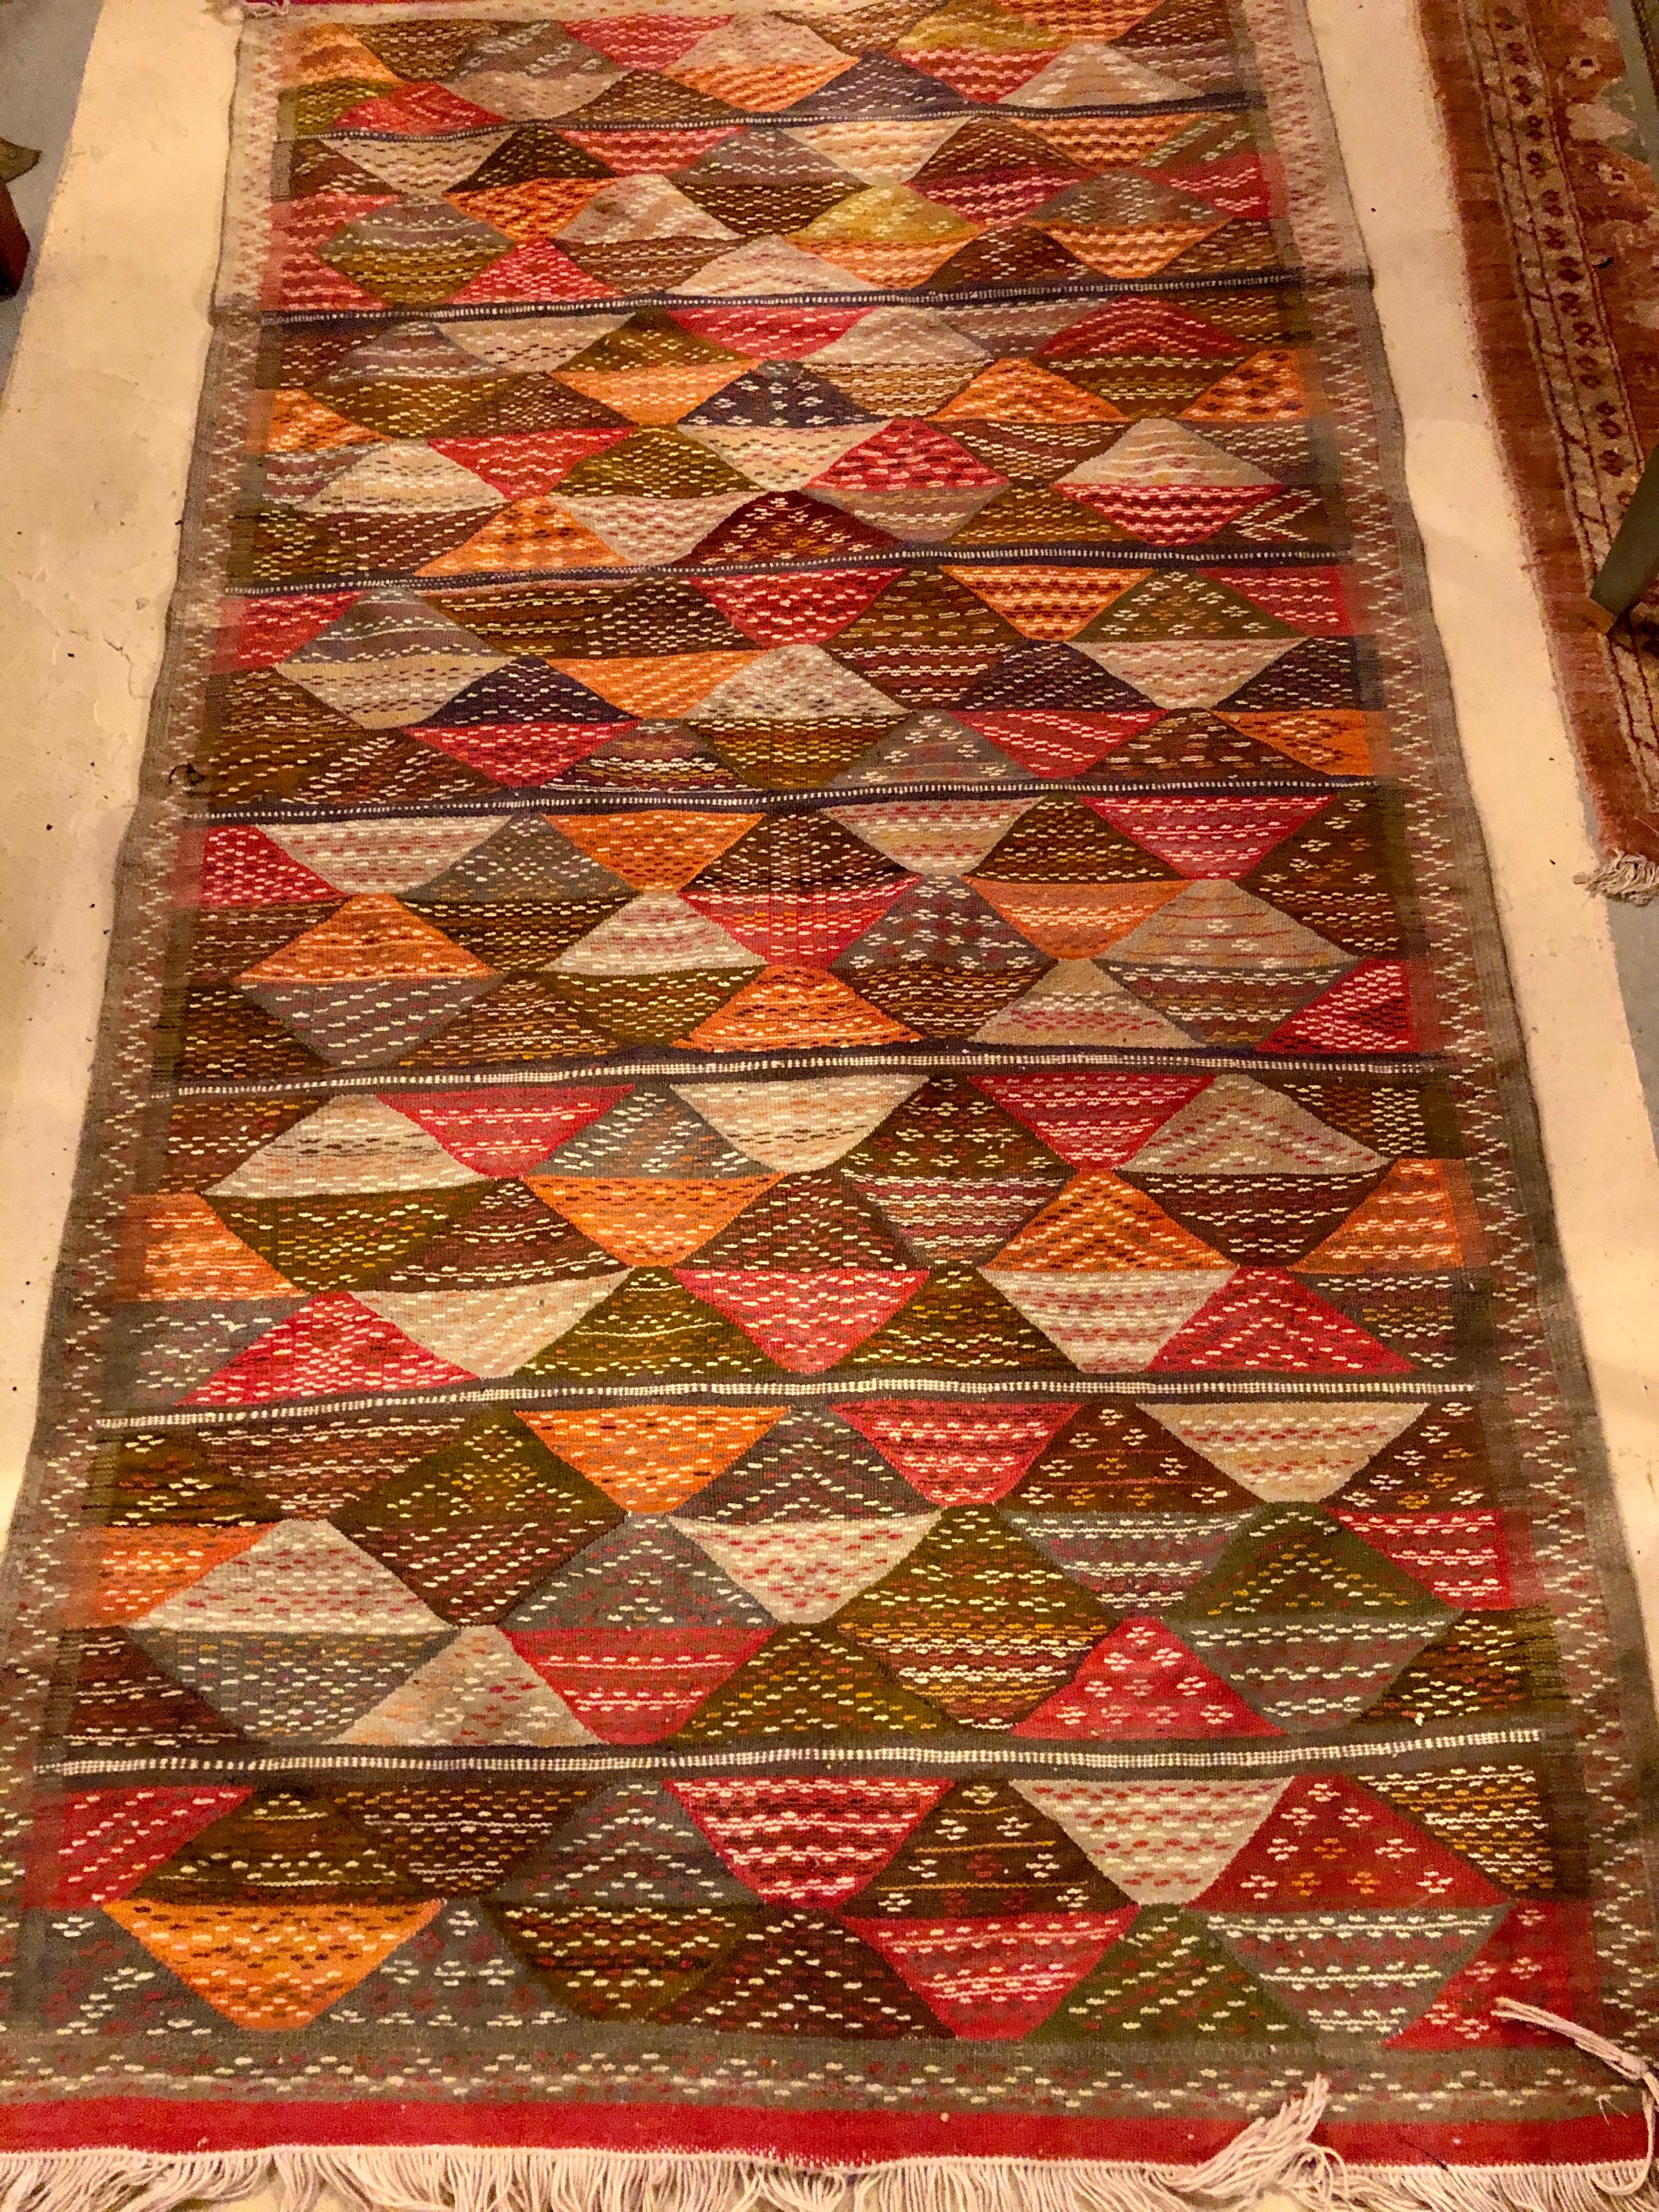 Moroccan Vintage Tribal Handwoven Wool and Organic Dye Rug or Carpet in Triangle Patterns